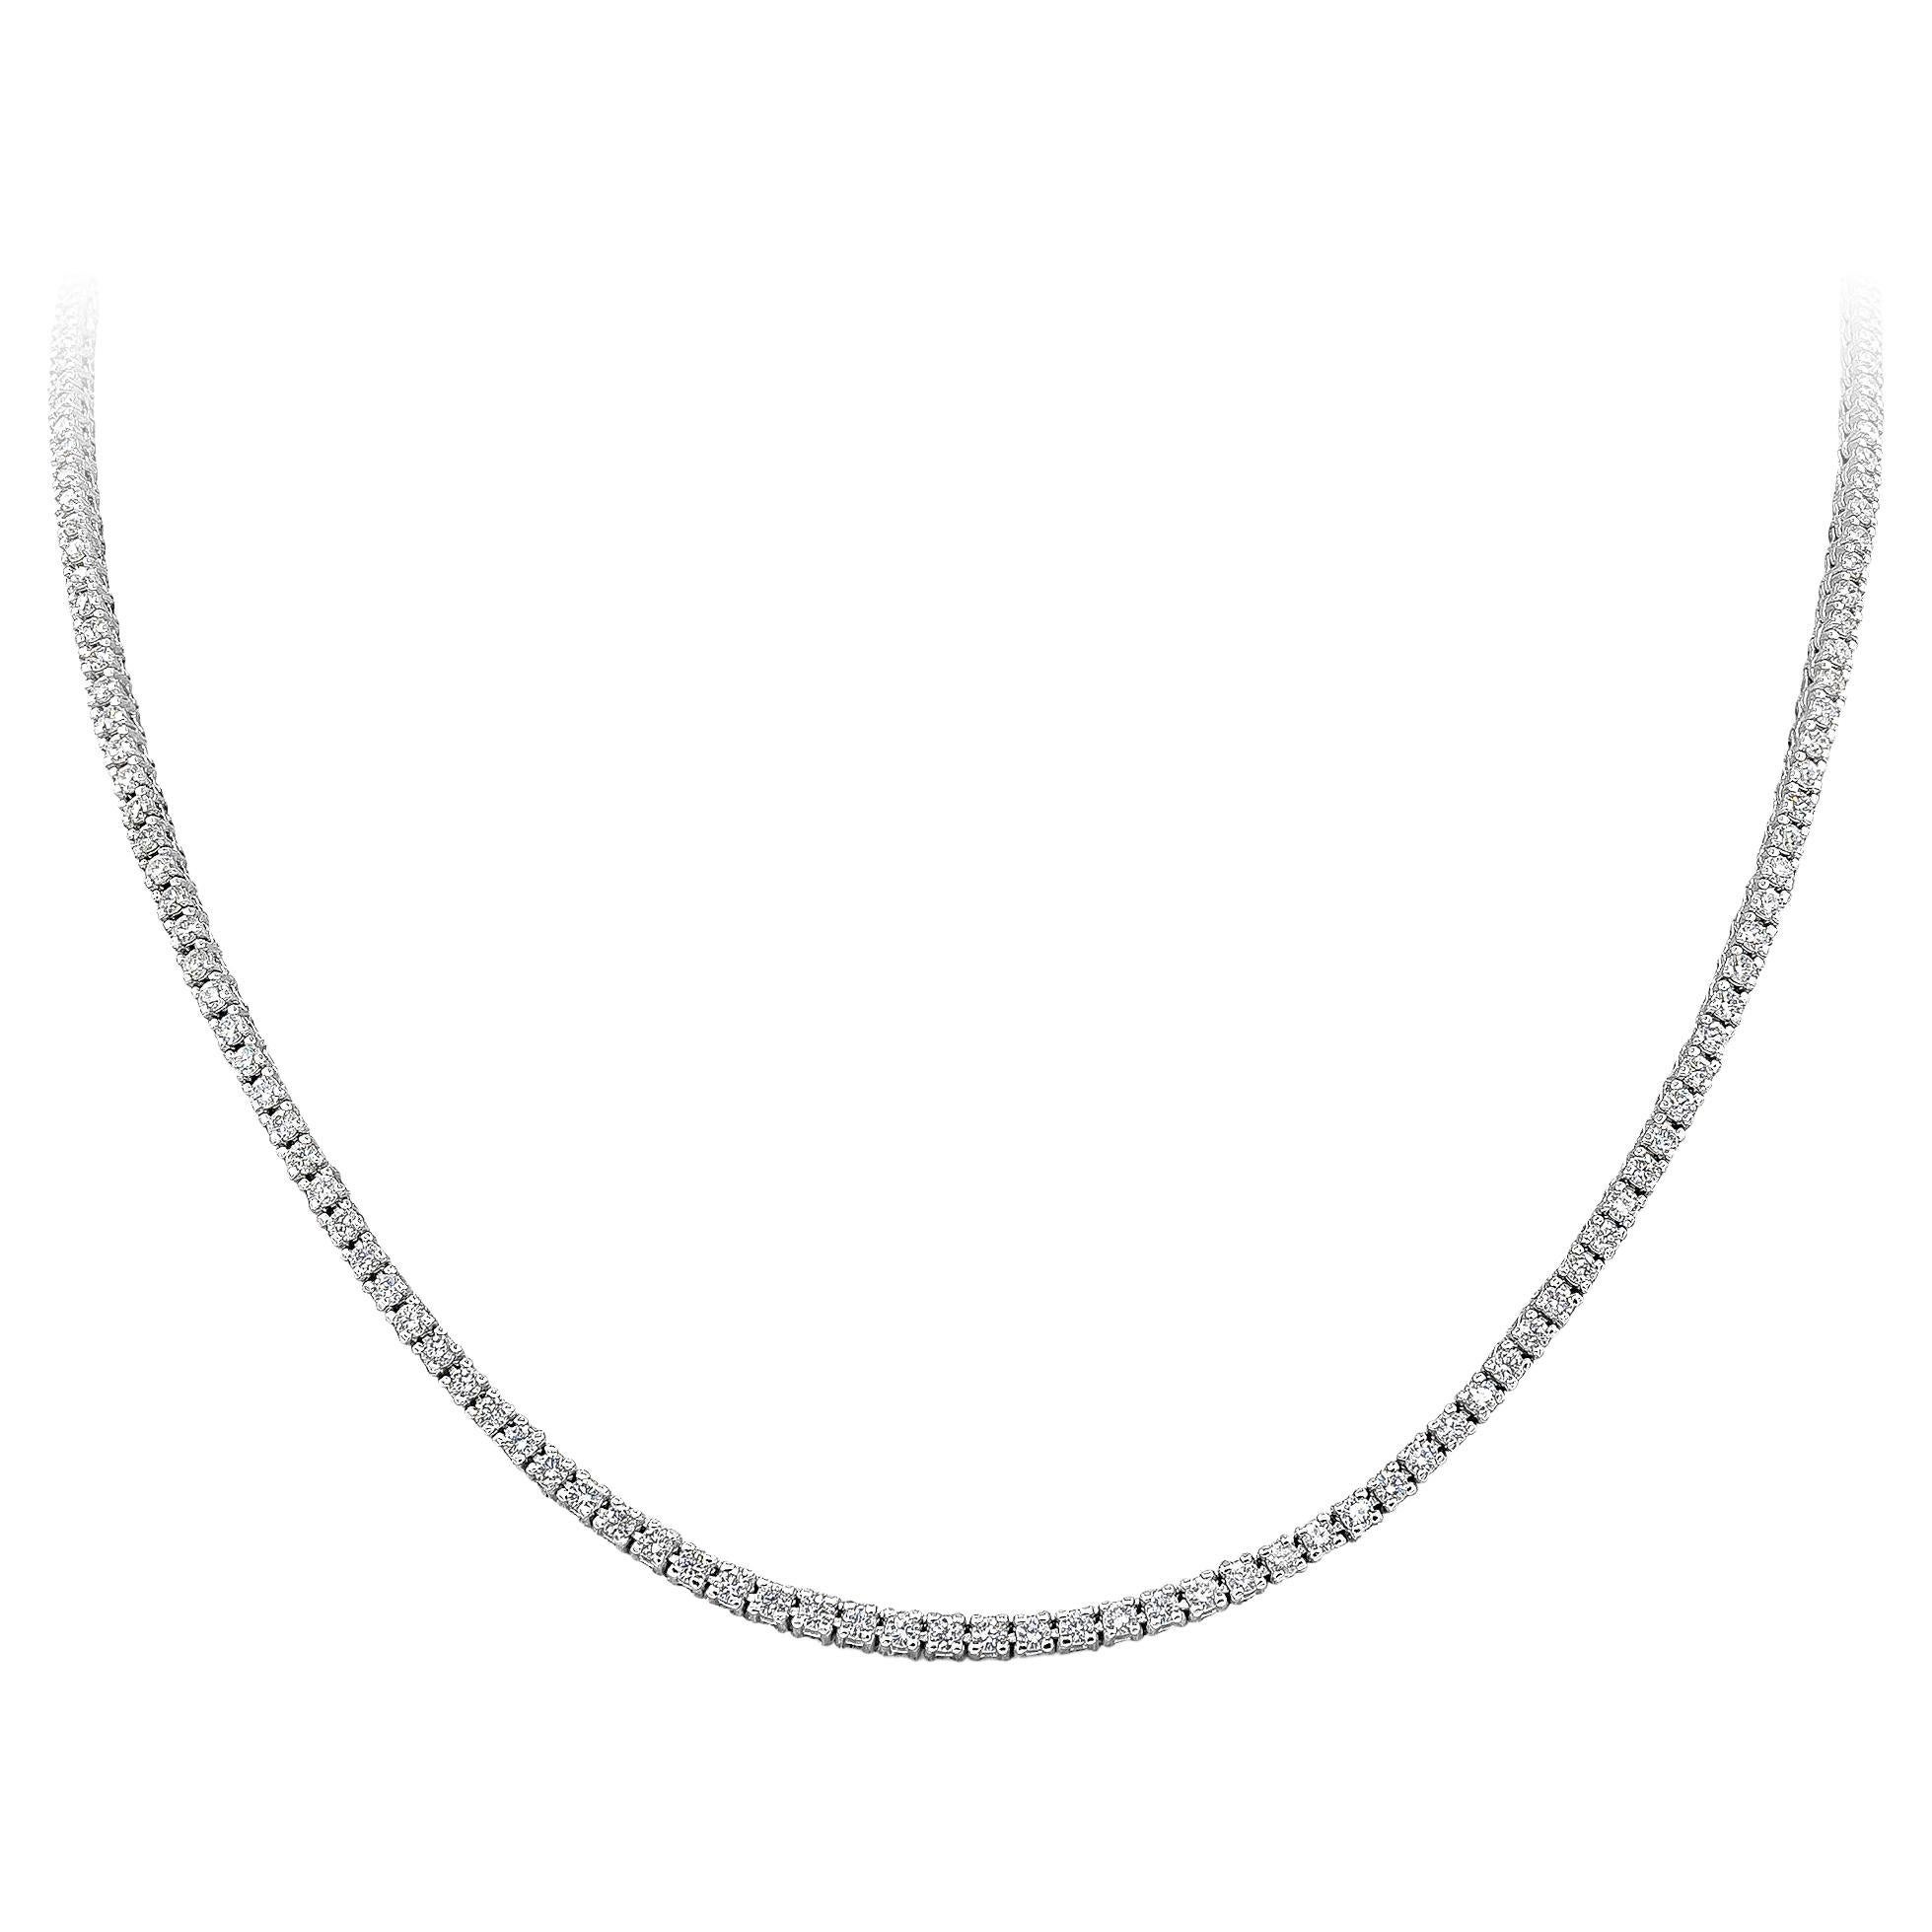 2.62 Carat Round Diamond Tennis Necklace in 14k White Gold For Sale